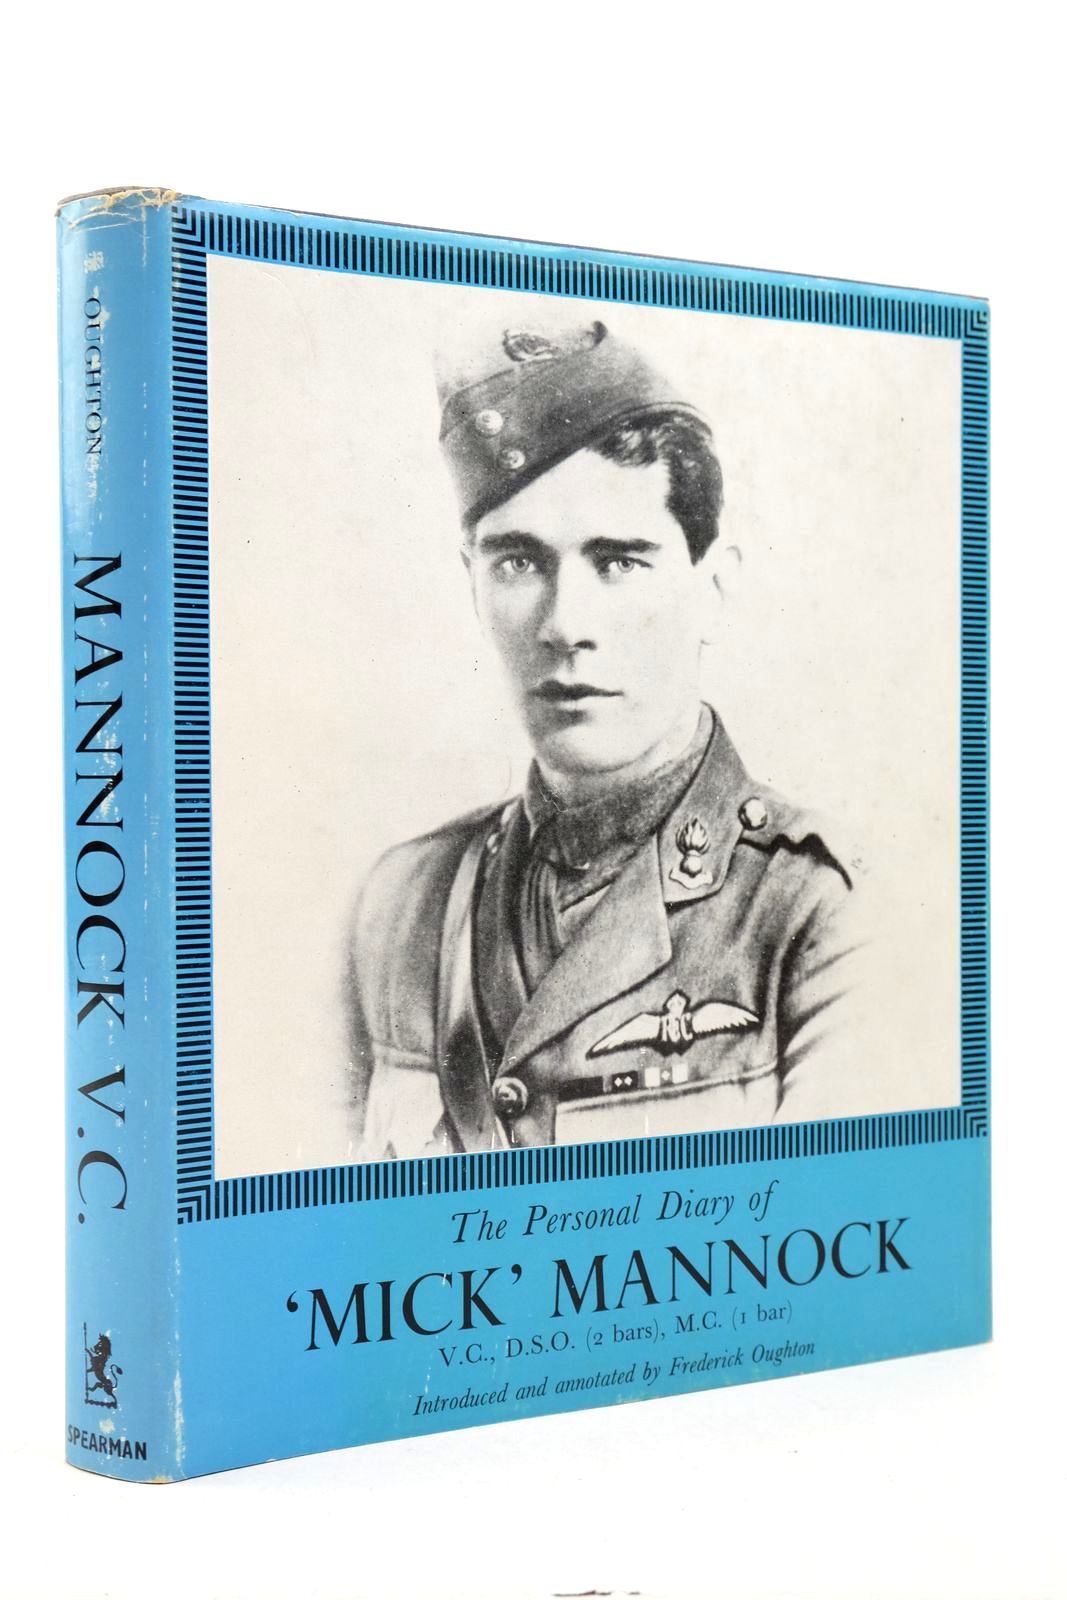 Photo of THE PERSONAL DIARY OF MAJOR EDWARD 'MICK' MANNOCK written by Mannock, Mick Oughton, Frederick published by Neville Spearman (STOCK CODE: 2139992)  for sale by Stella & Rose's Books